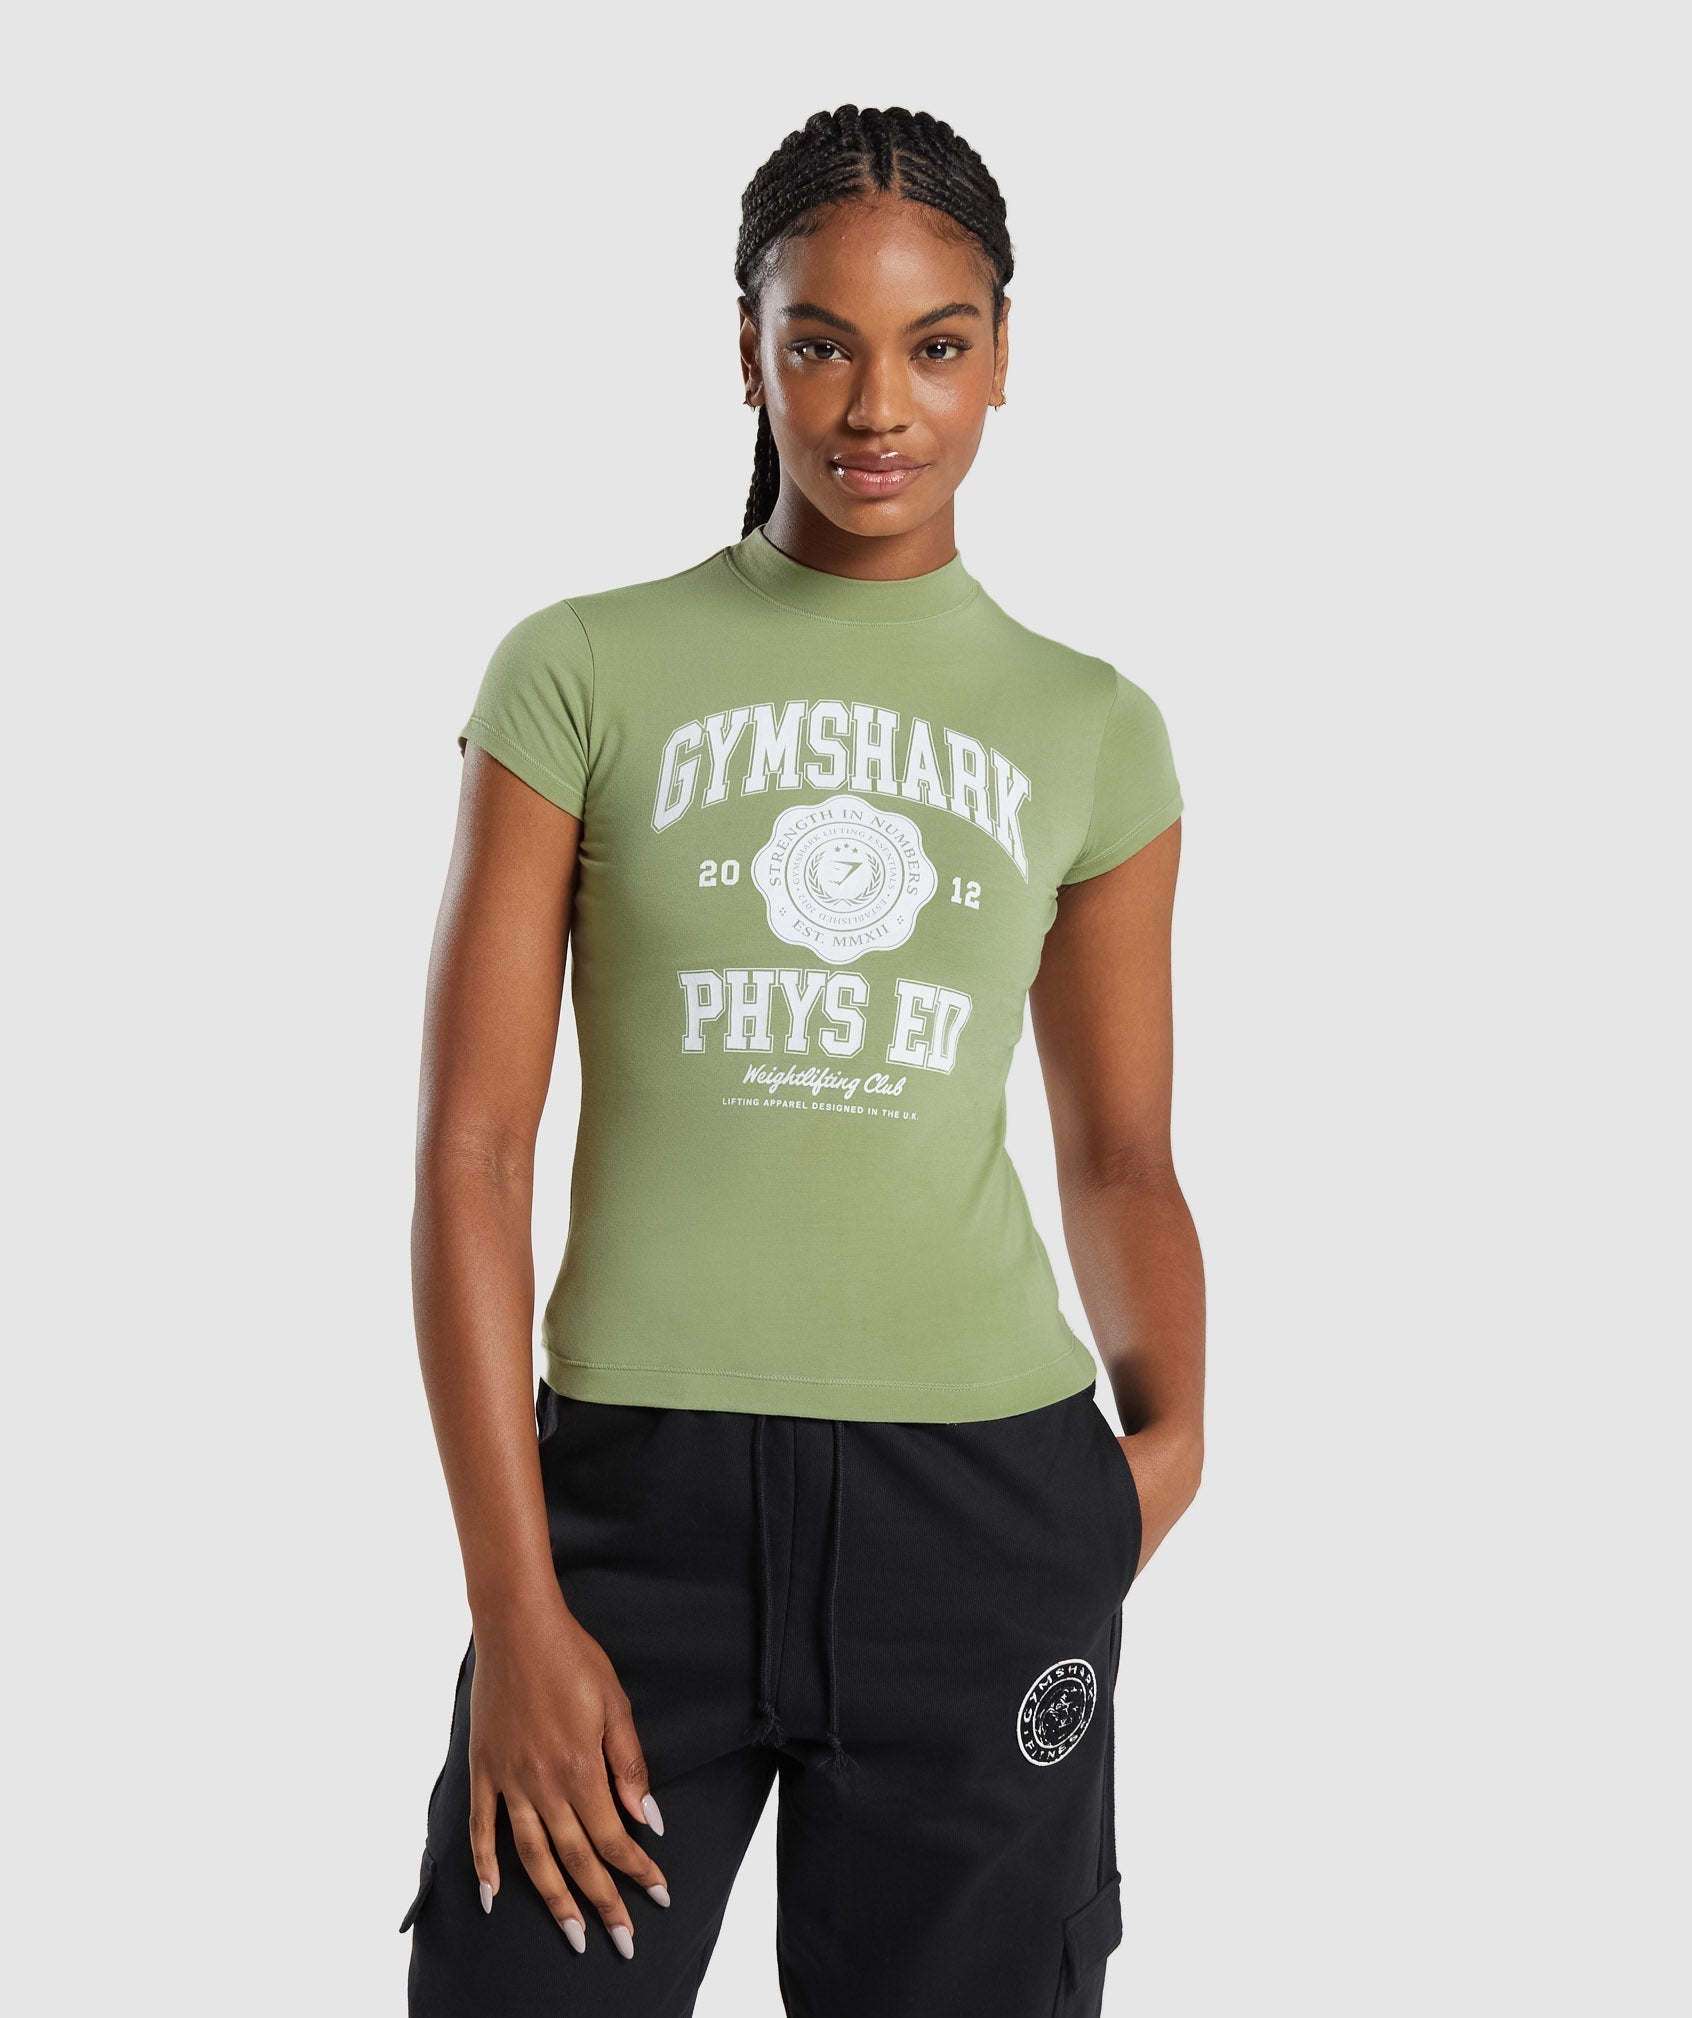 Phys Ed Graphic Body Fit T-Shirt in Light Sage Green - view 1